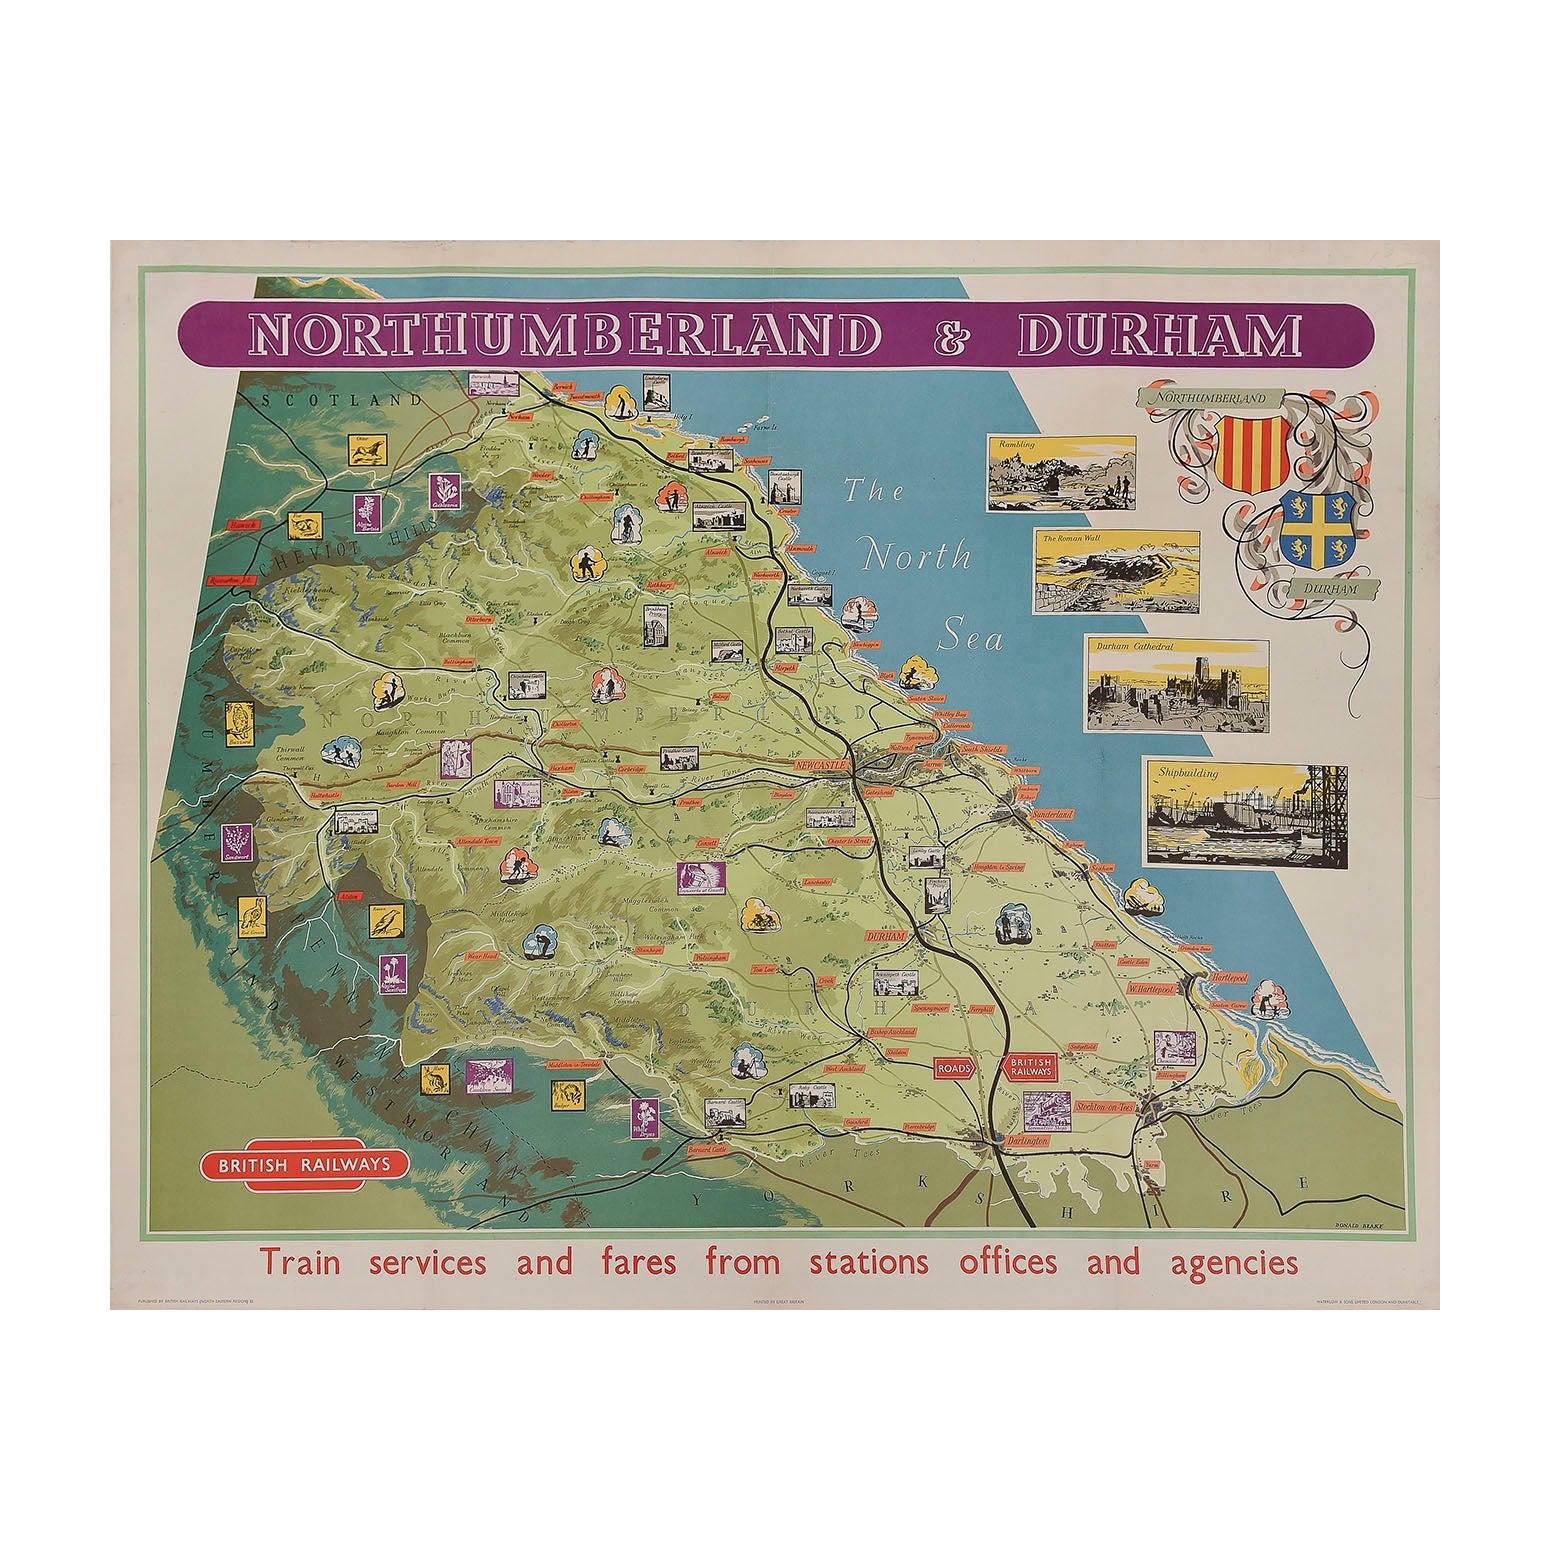 Original British Railways decorative poster map of Northumberland and Durham by Donald Blake, c. 1955. An uncommon, large format, station poster map, featuring vignettes of places to visit drawn in a modern style. The poster includes the crests of Northumberland and Durham, together with four large inserts advertising ‘Rambling’, ‘Roman Wall’, ‘Durham Cathedral’, and ‘Shipbuilding’.